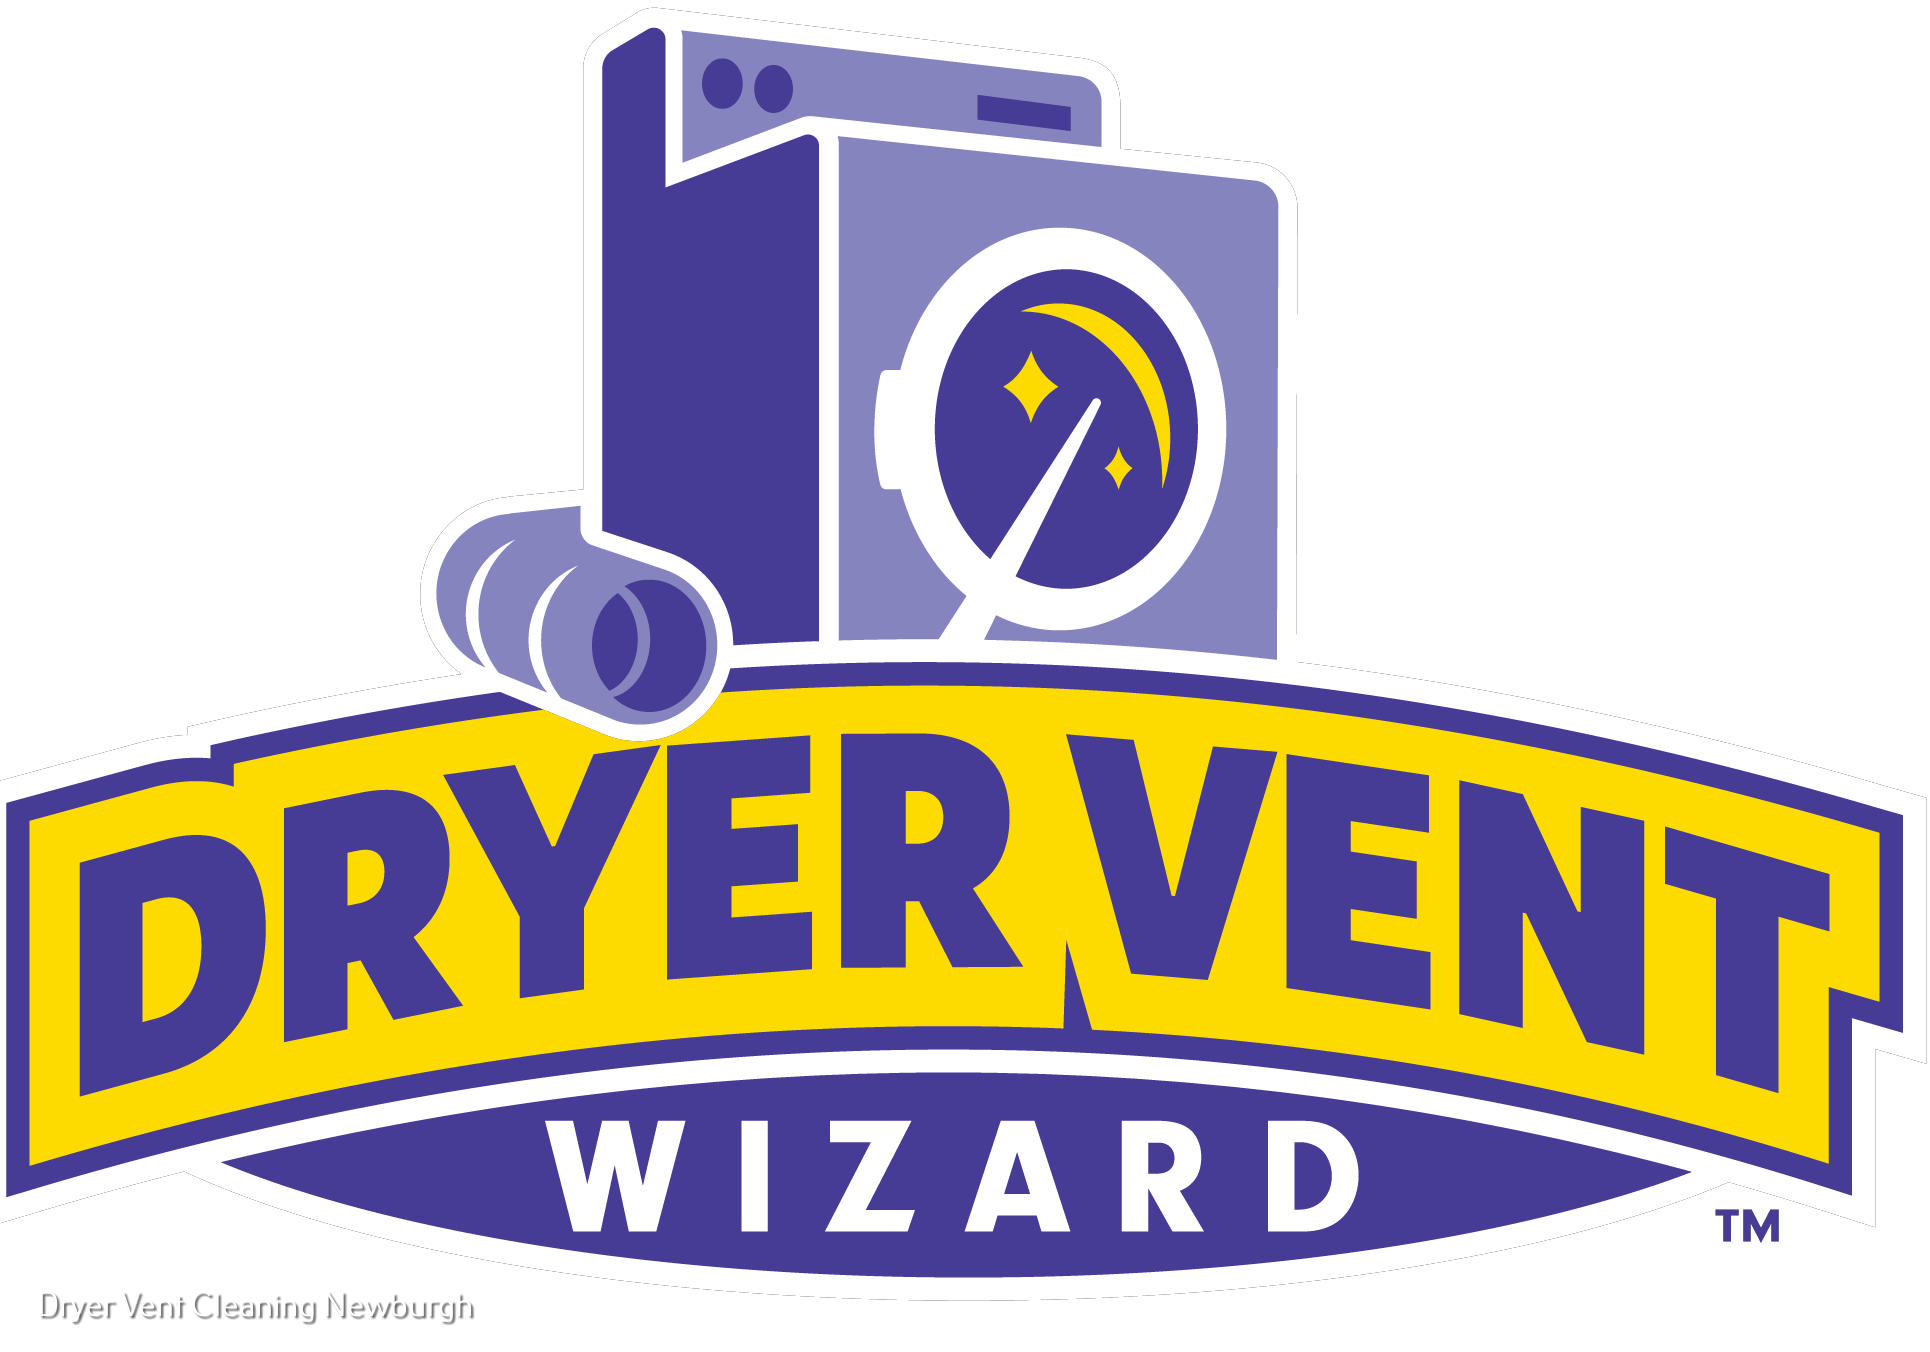 Dryer Vent Wizard Explains its Vent Cleaning Services to Improve Homes